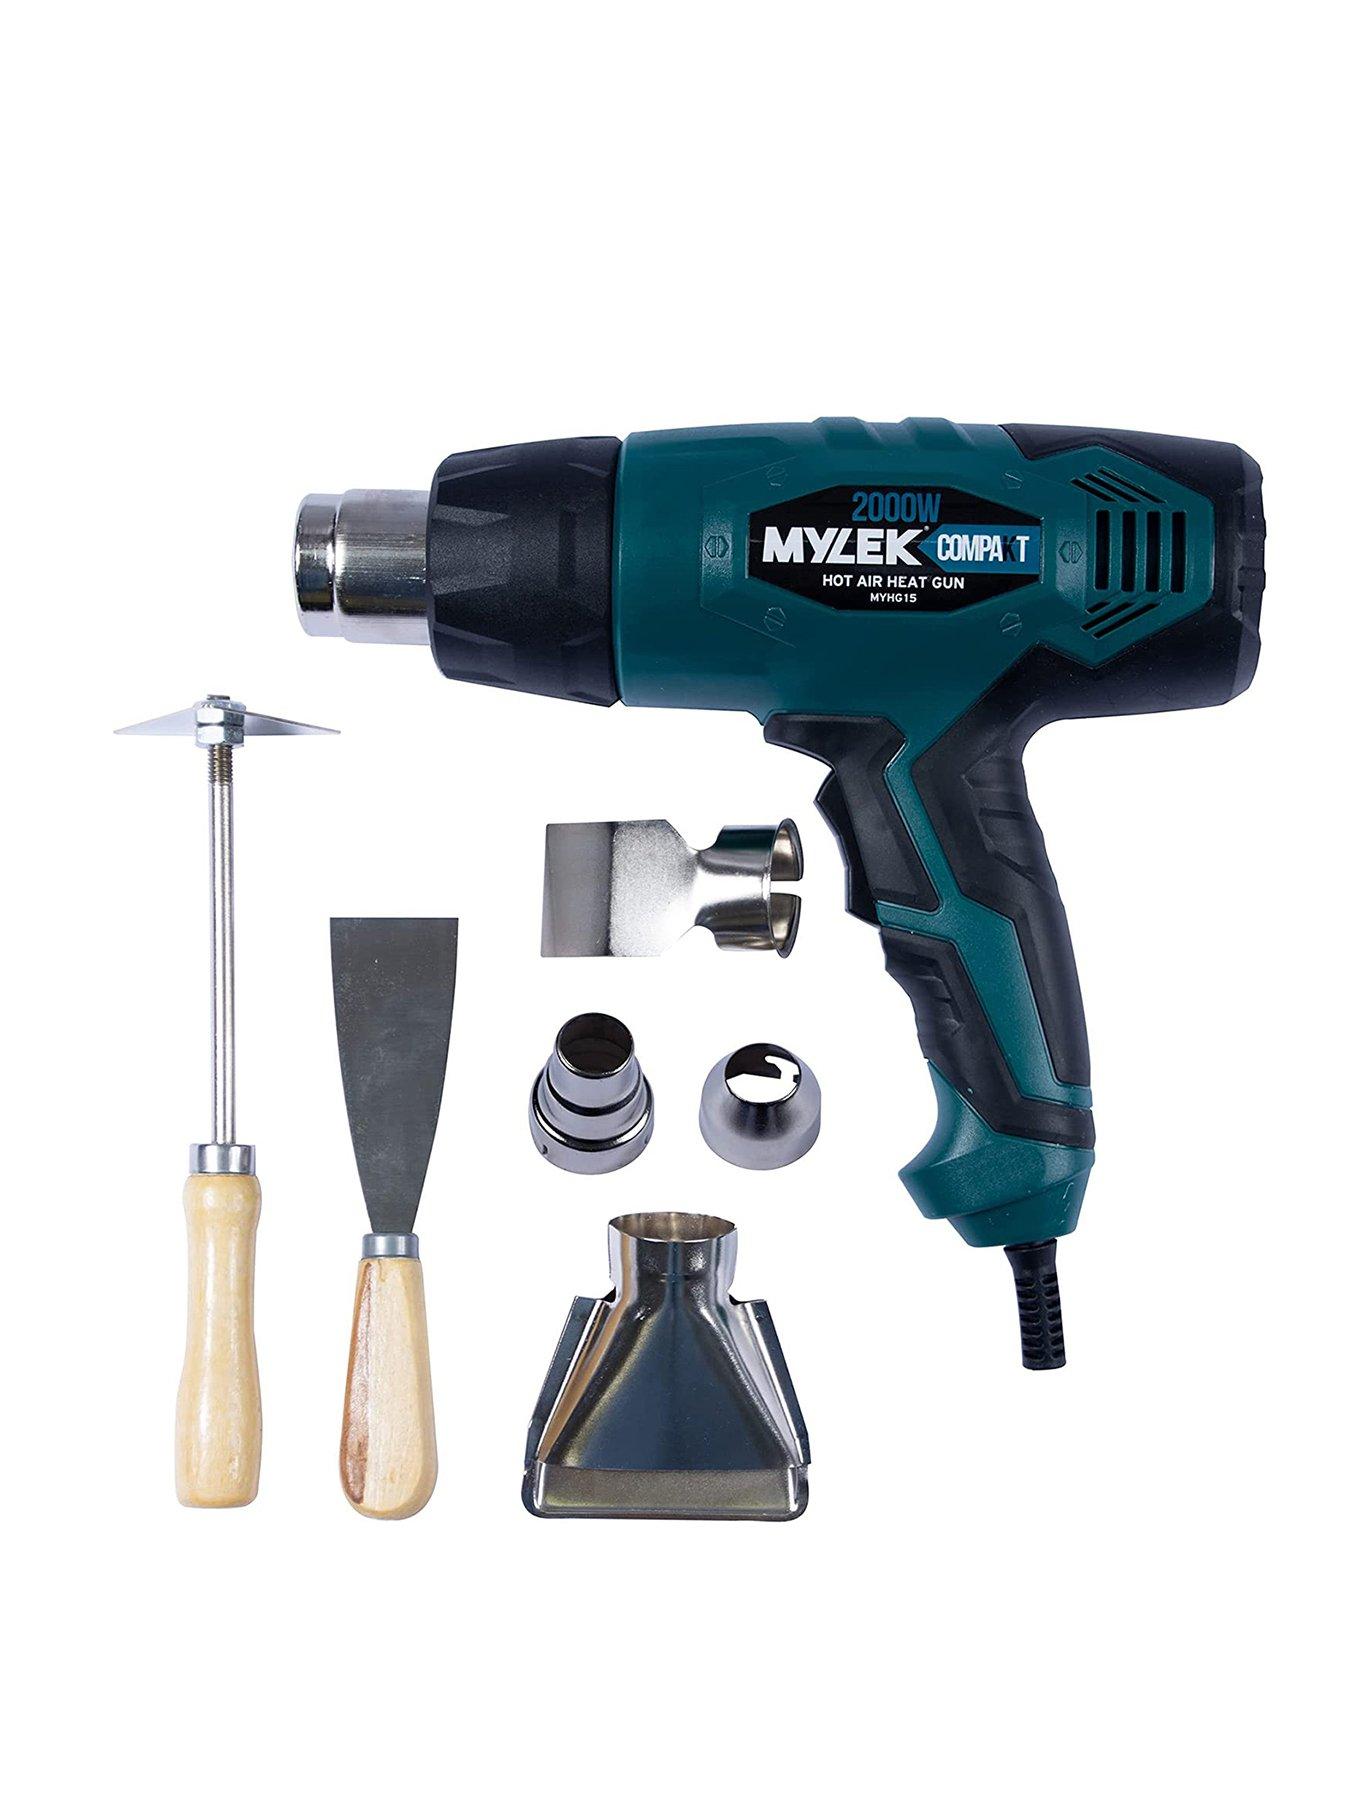 ONE+ 18V Cordless 3-Tool Hobby Kit with Compact Glue Gun, Soldering Iron,  Rotary Tool, 1.5 Ah Battery, and Charger